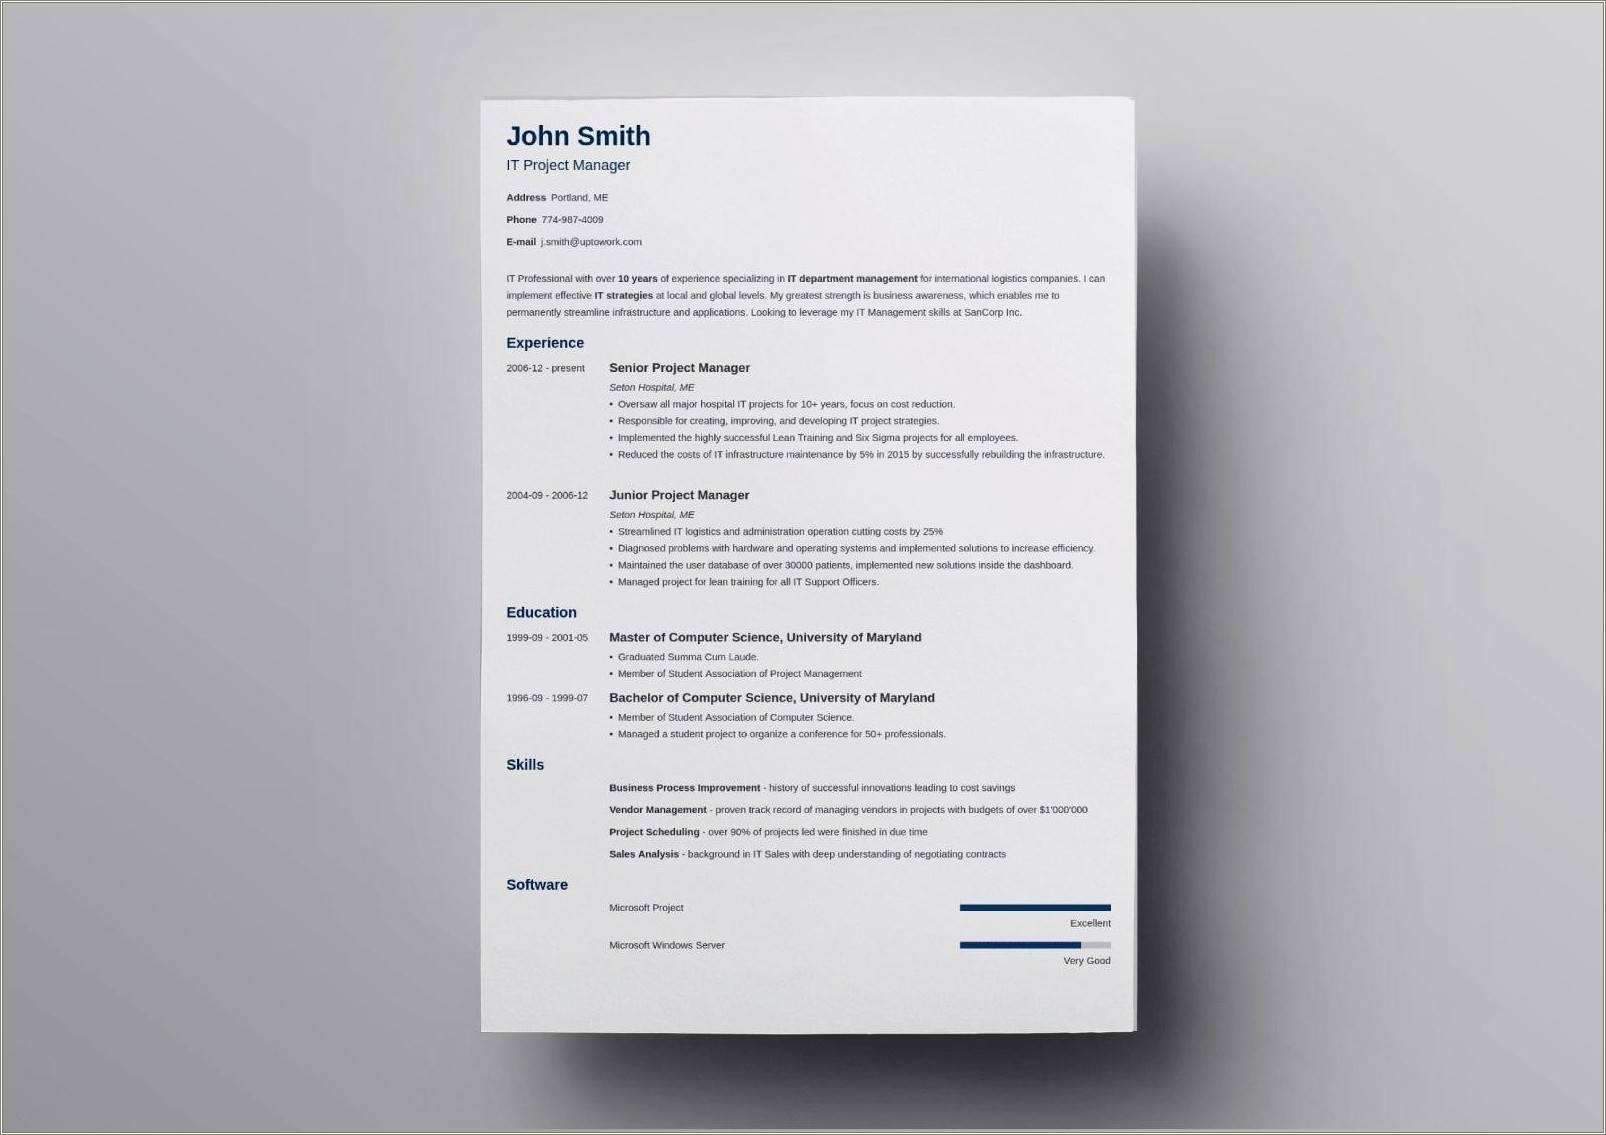 Resume Format In Word For Autofill Applications